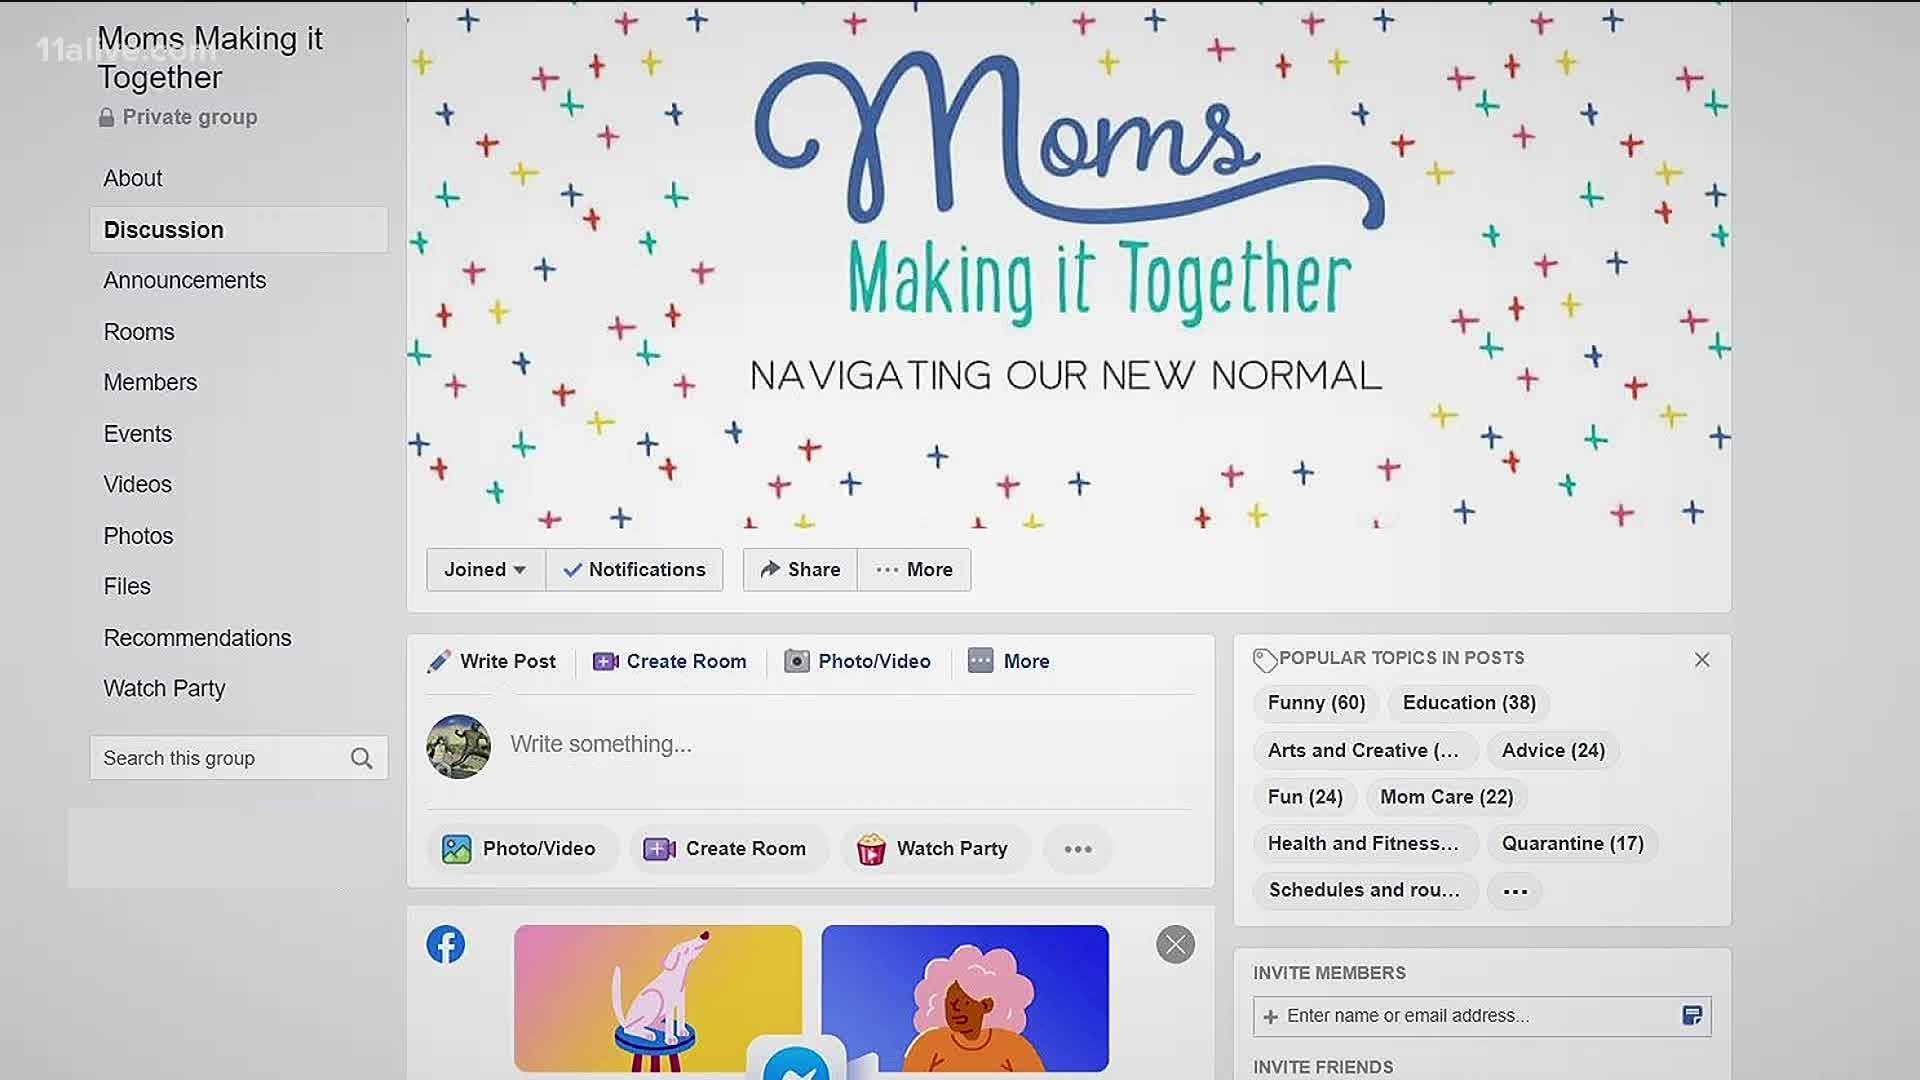 What started out as a group text between some moms in Dunwoody, grew to become the Facebook group "Moms Making it Together."